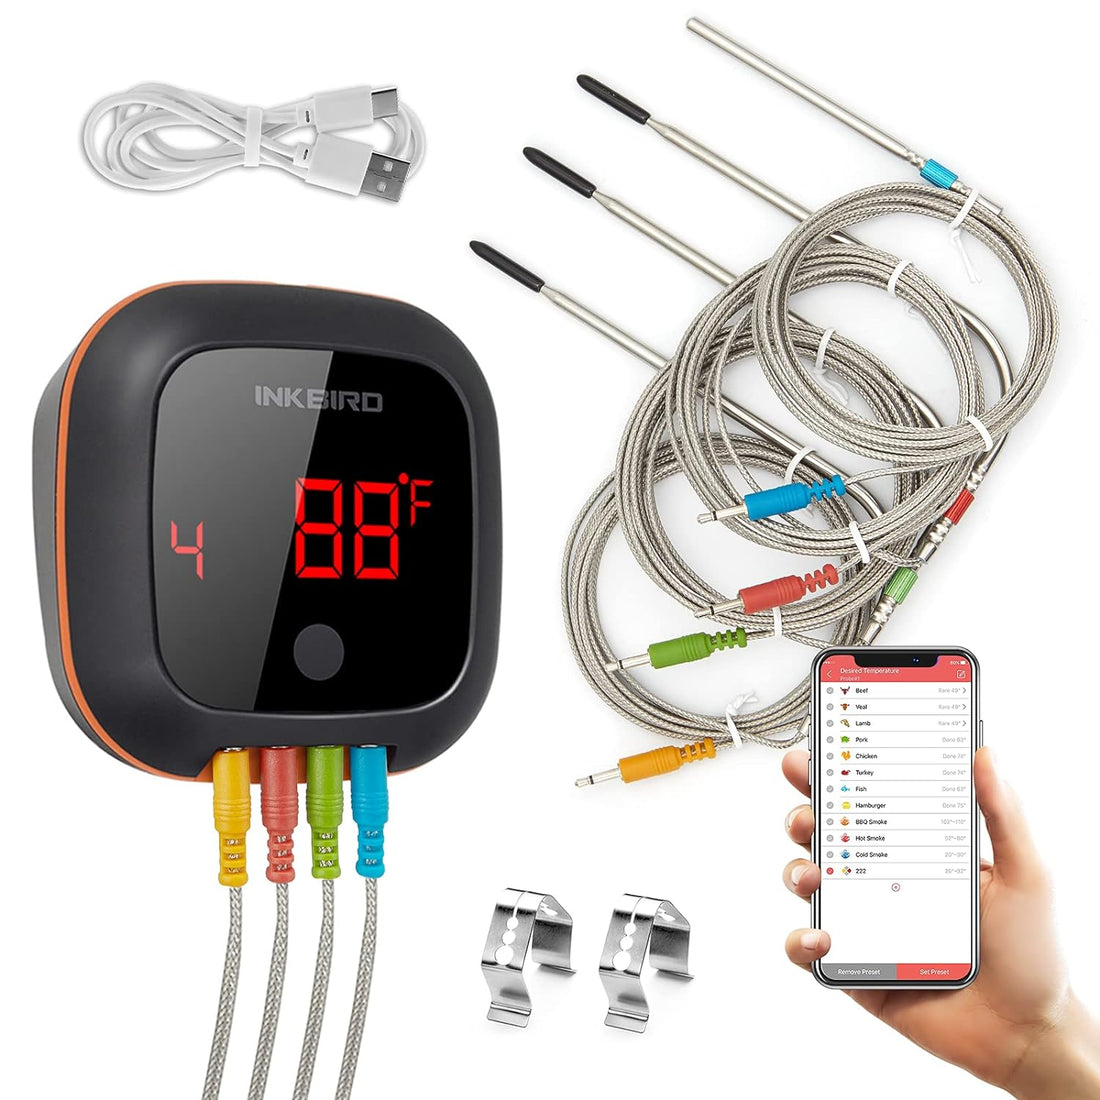 Grill BBQ Bluetooth Meat Thermometer with 4 Colored Probes, Inkbird Digital Wireless Grill Thermometer, Timer, Alarm,150ft Kitchen Food Cooking Meat Thermometer for Smoker, Oven, Drum